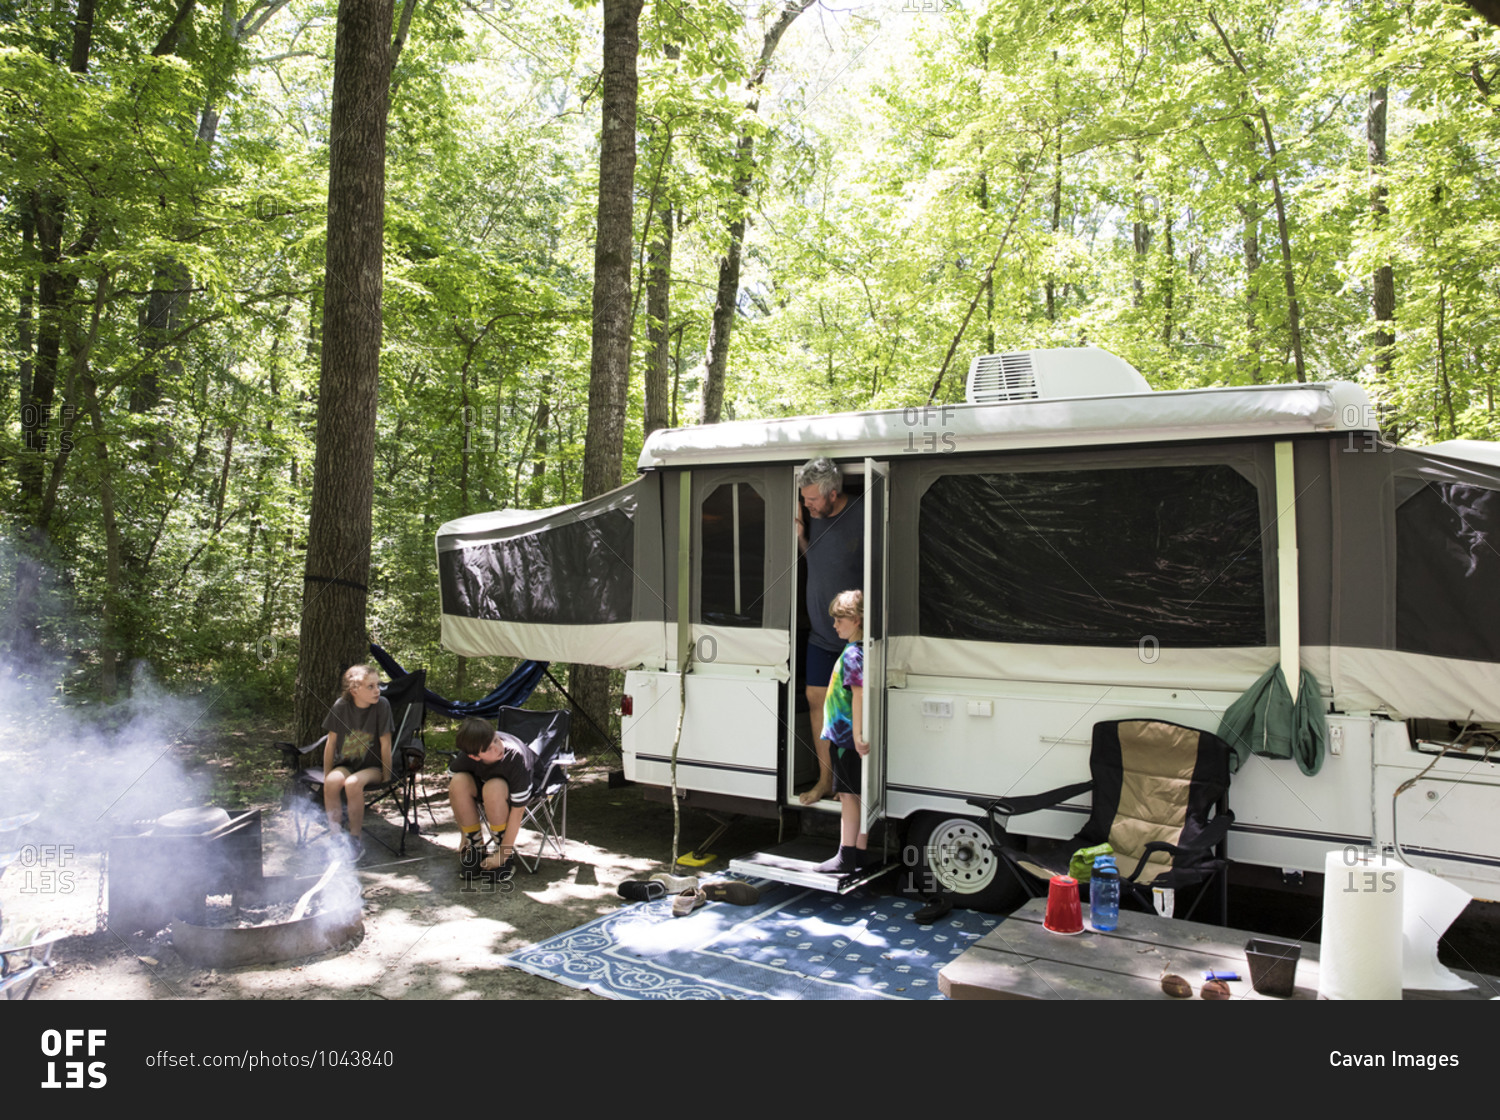 Wide View of Pop Up Camper at Campsite on Family Camping Trip